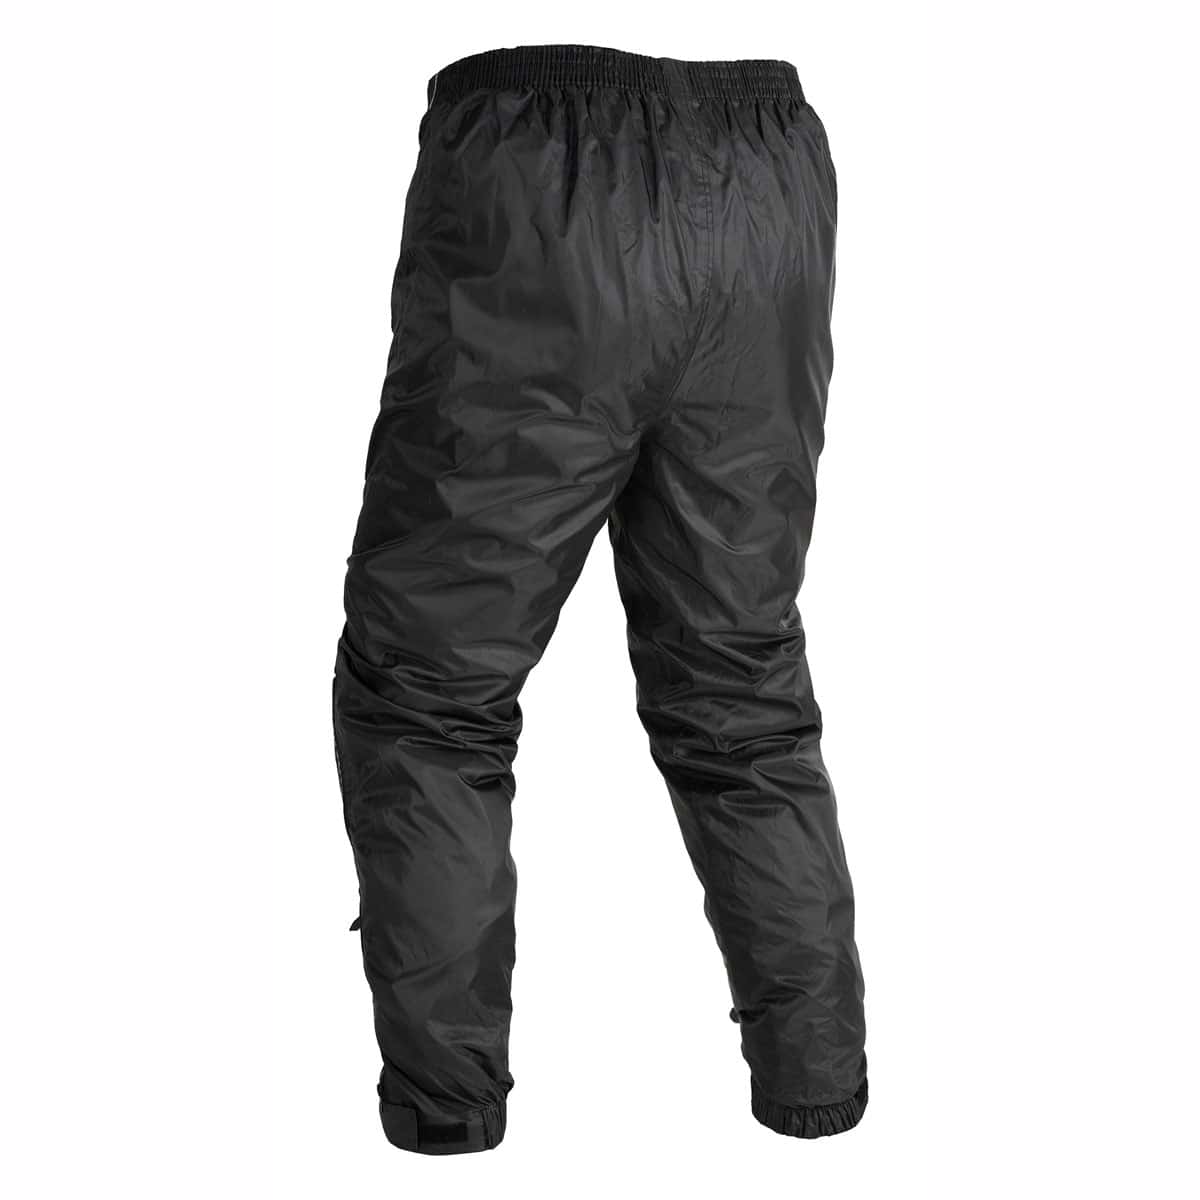 Oxford Rainseal Over Trousers WP - Black back